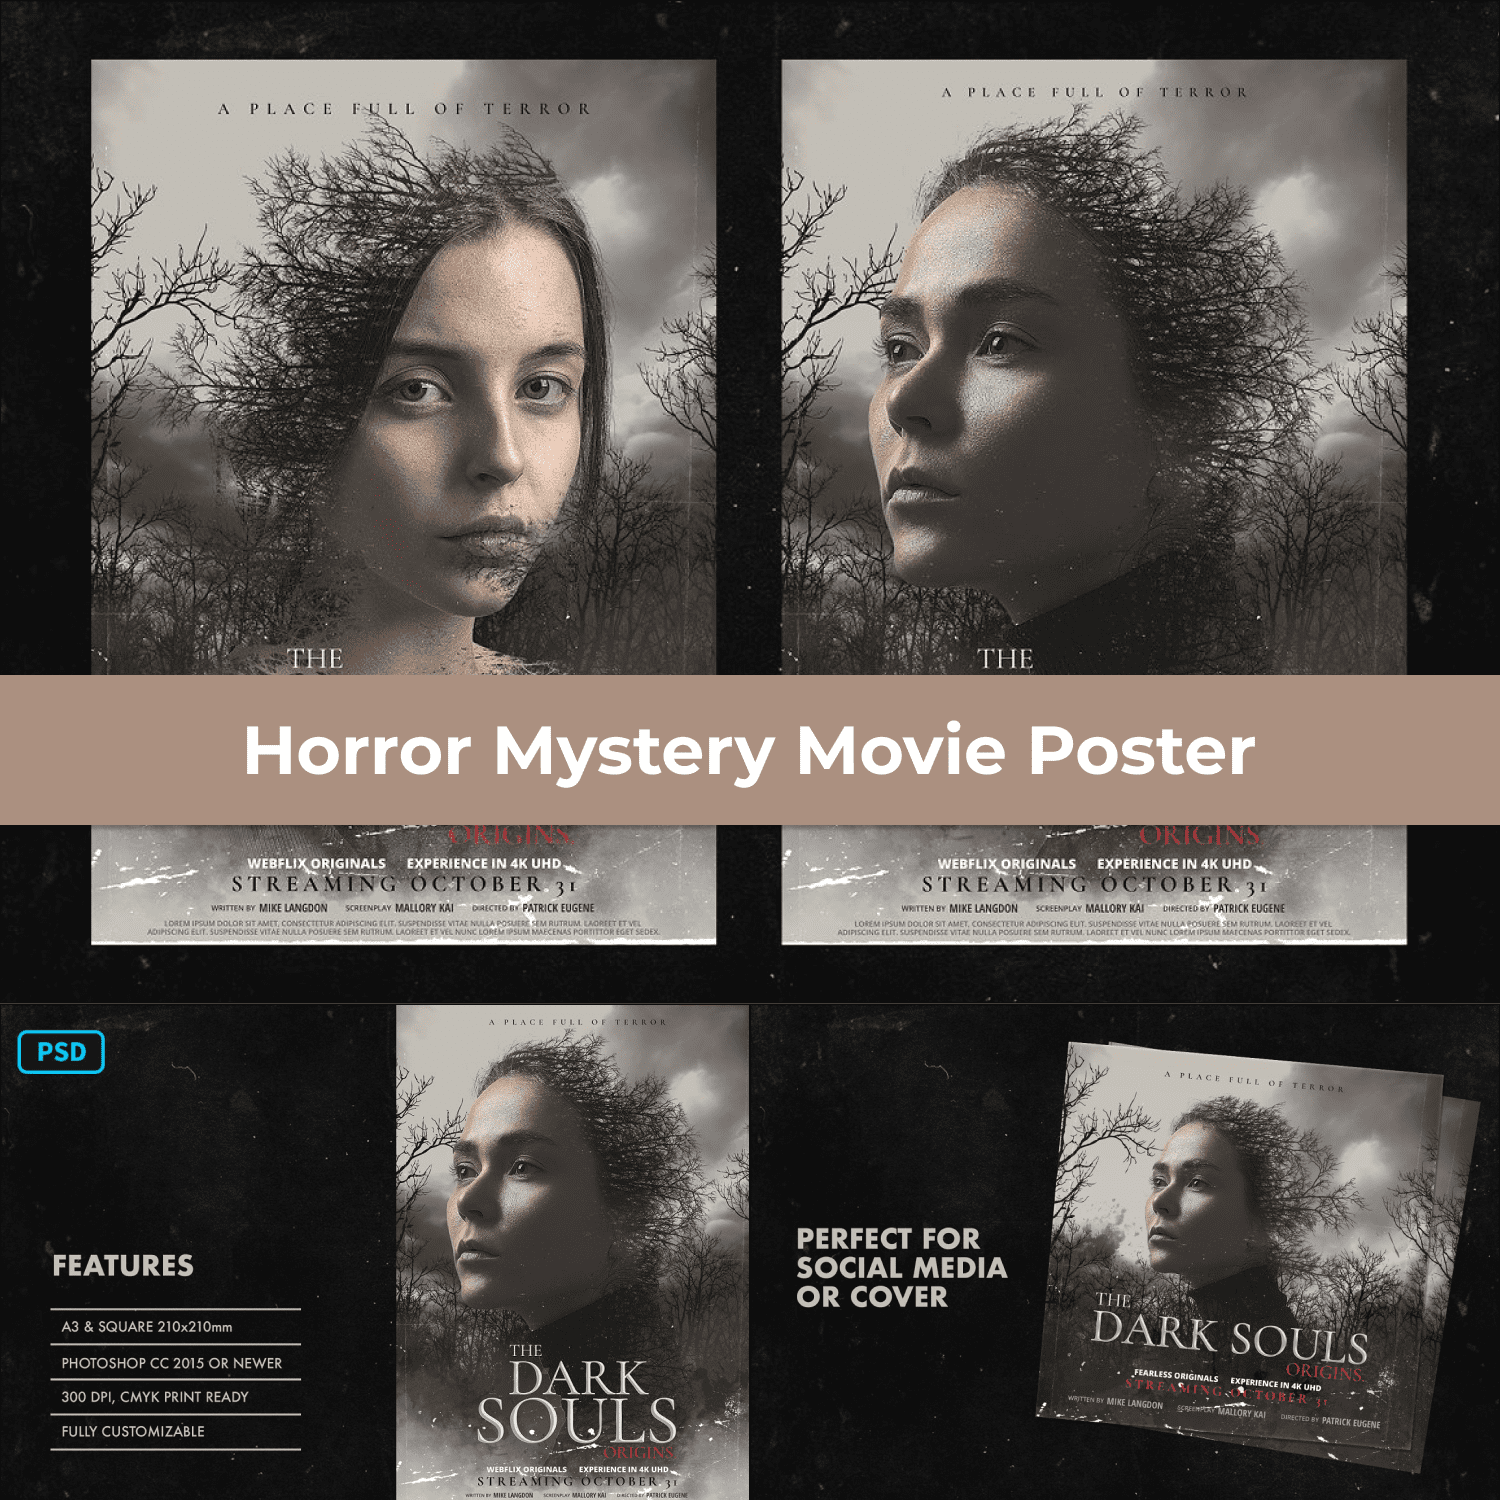 Horror Mystery Movie Poster preview image.